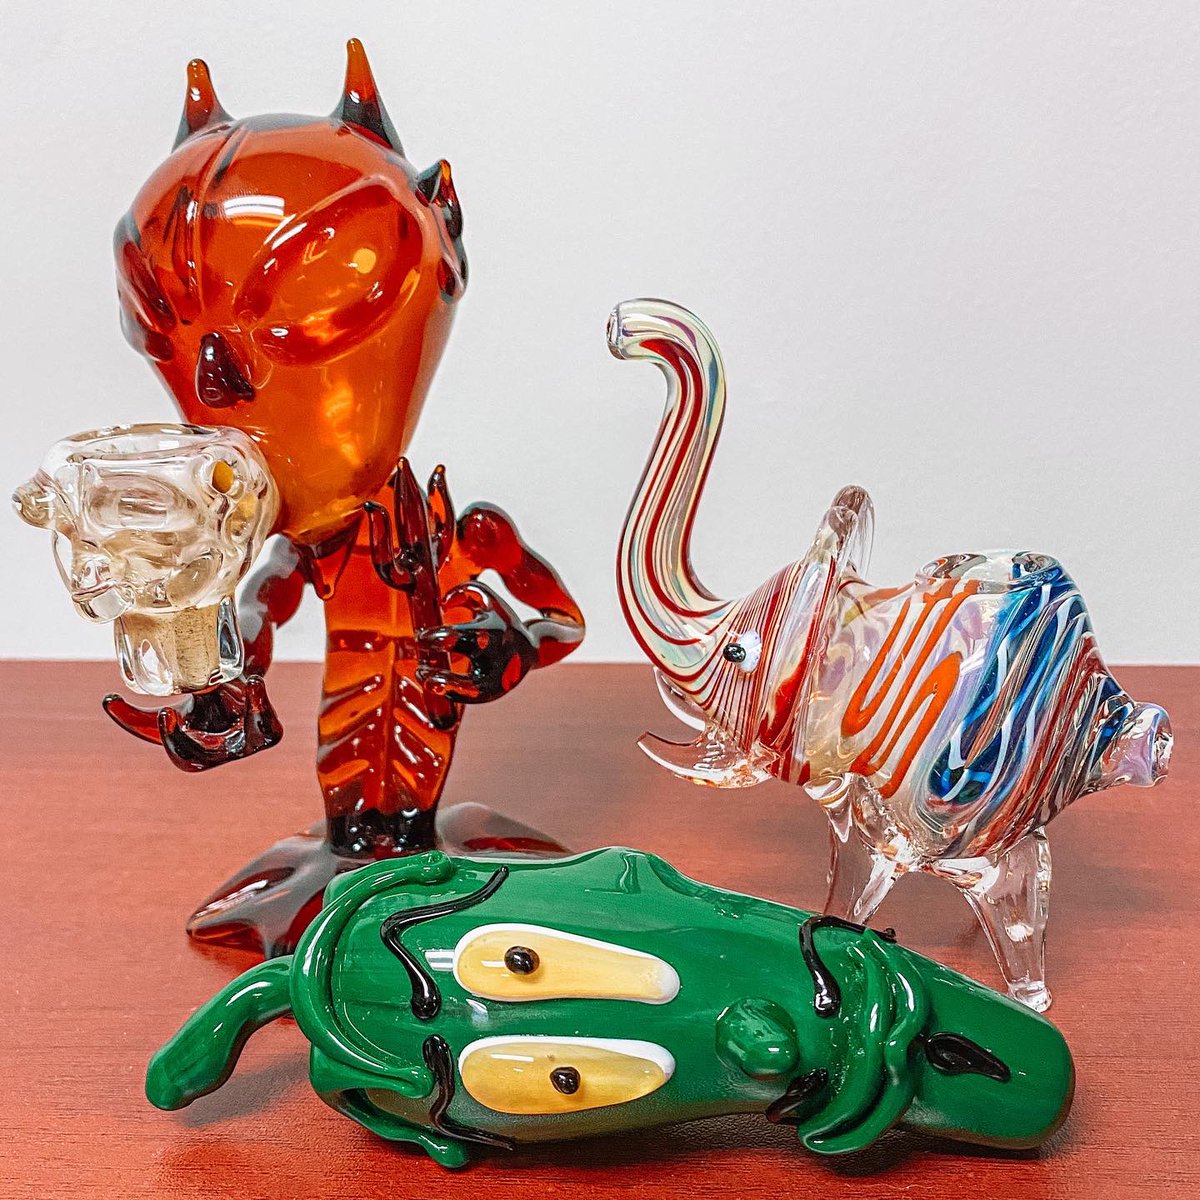 Paraphernalia (noun) par·​a·​pher·​na·​lia : objects that are used to do a particular activity; objects of a particular kind.
Drug paraphernalia can be in the form of pipes, bongs, grinders, spoons, bags, syringes, cut straws, rollers and more. #drugsarebad #drugeducation